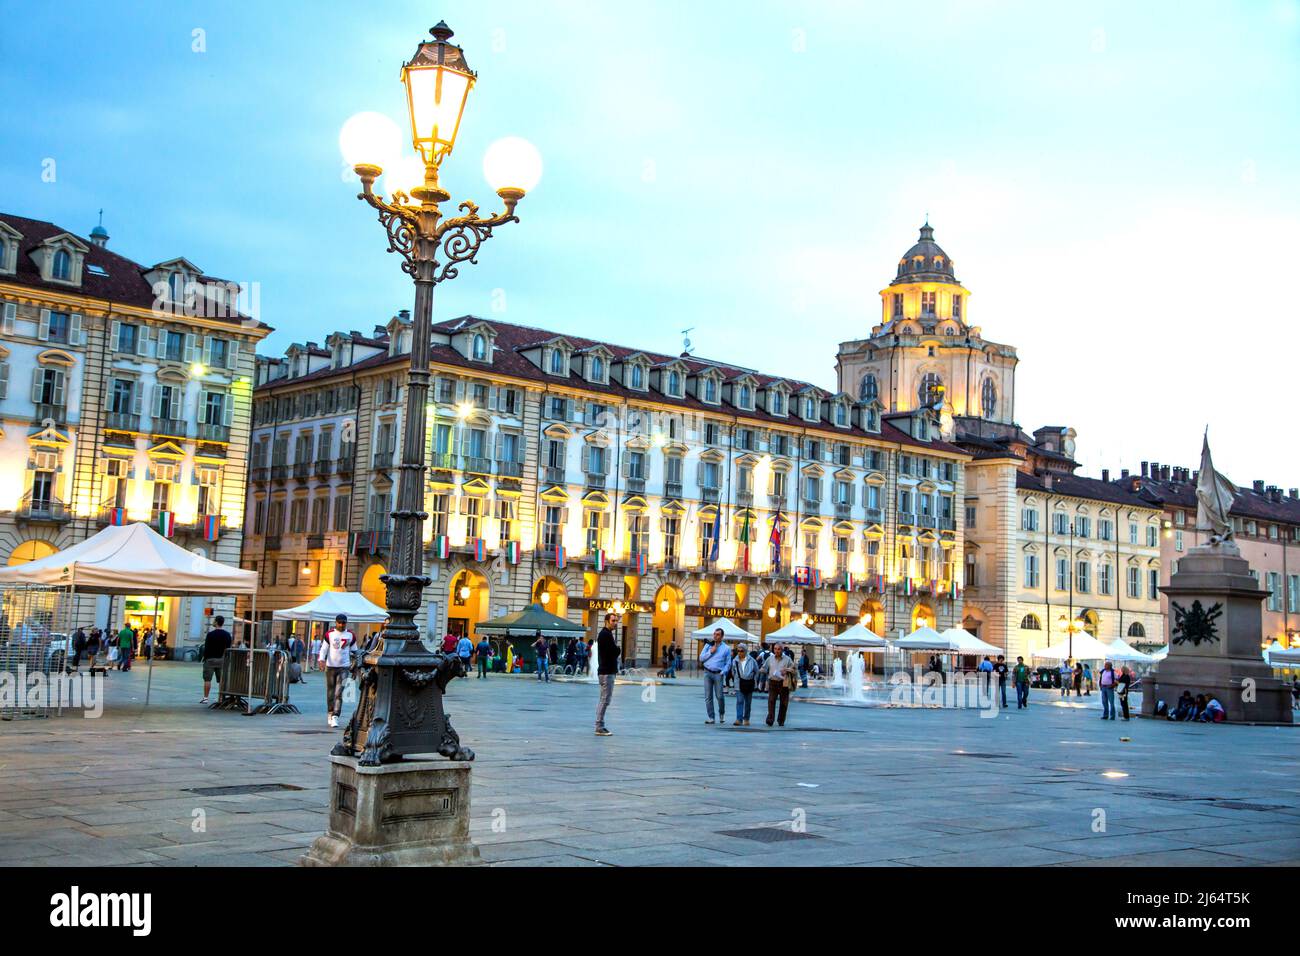 Visitors and locals taking an evening stroll around Piazza Castello in Turin Italy. Stock Photo